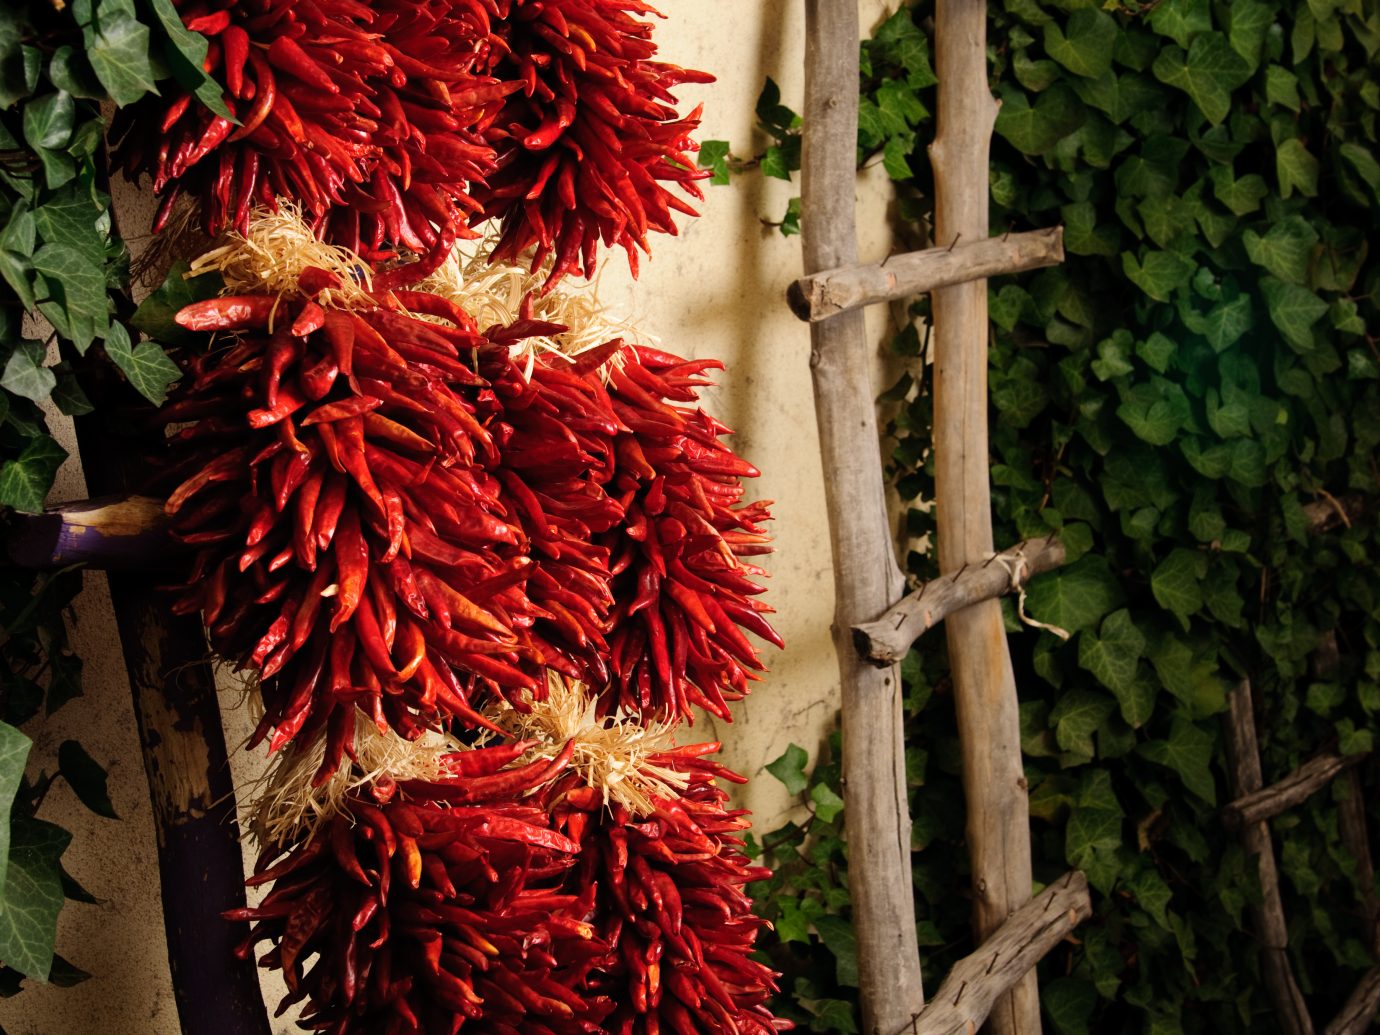 Red Chile ristra in a courtyard in Old Town in Albuquerque, New Mexico.